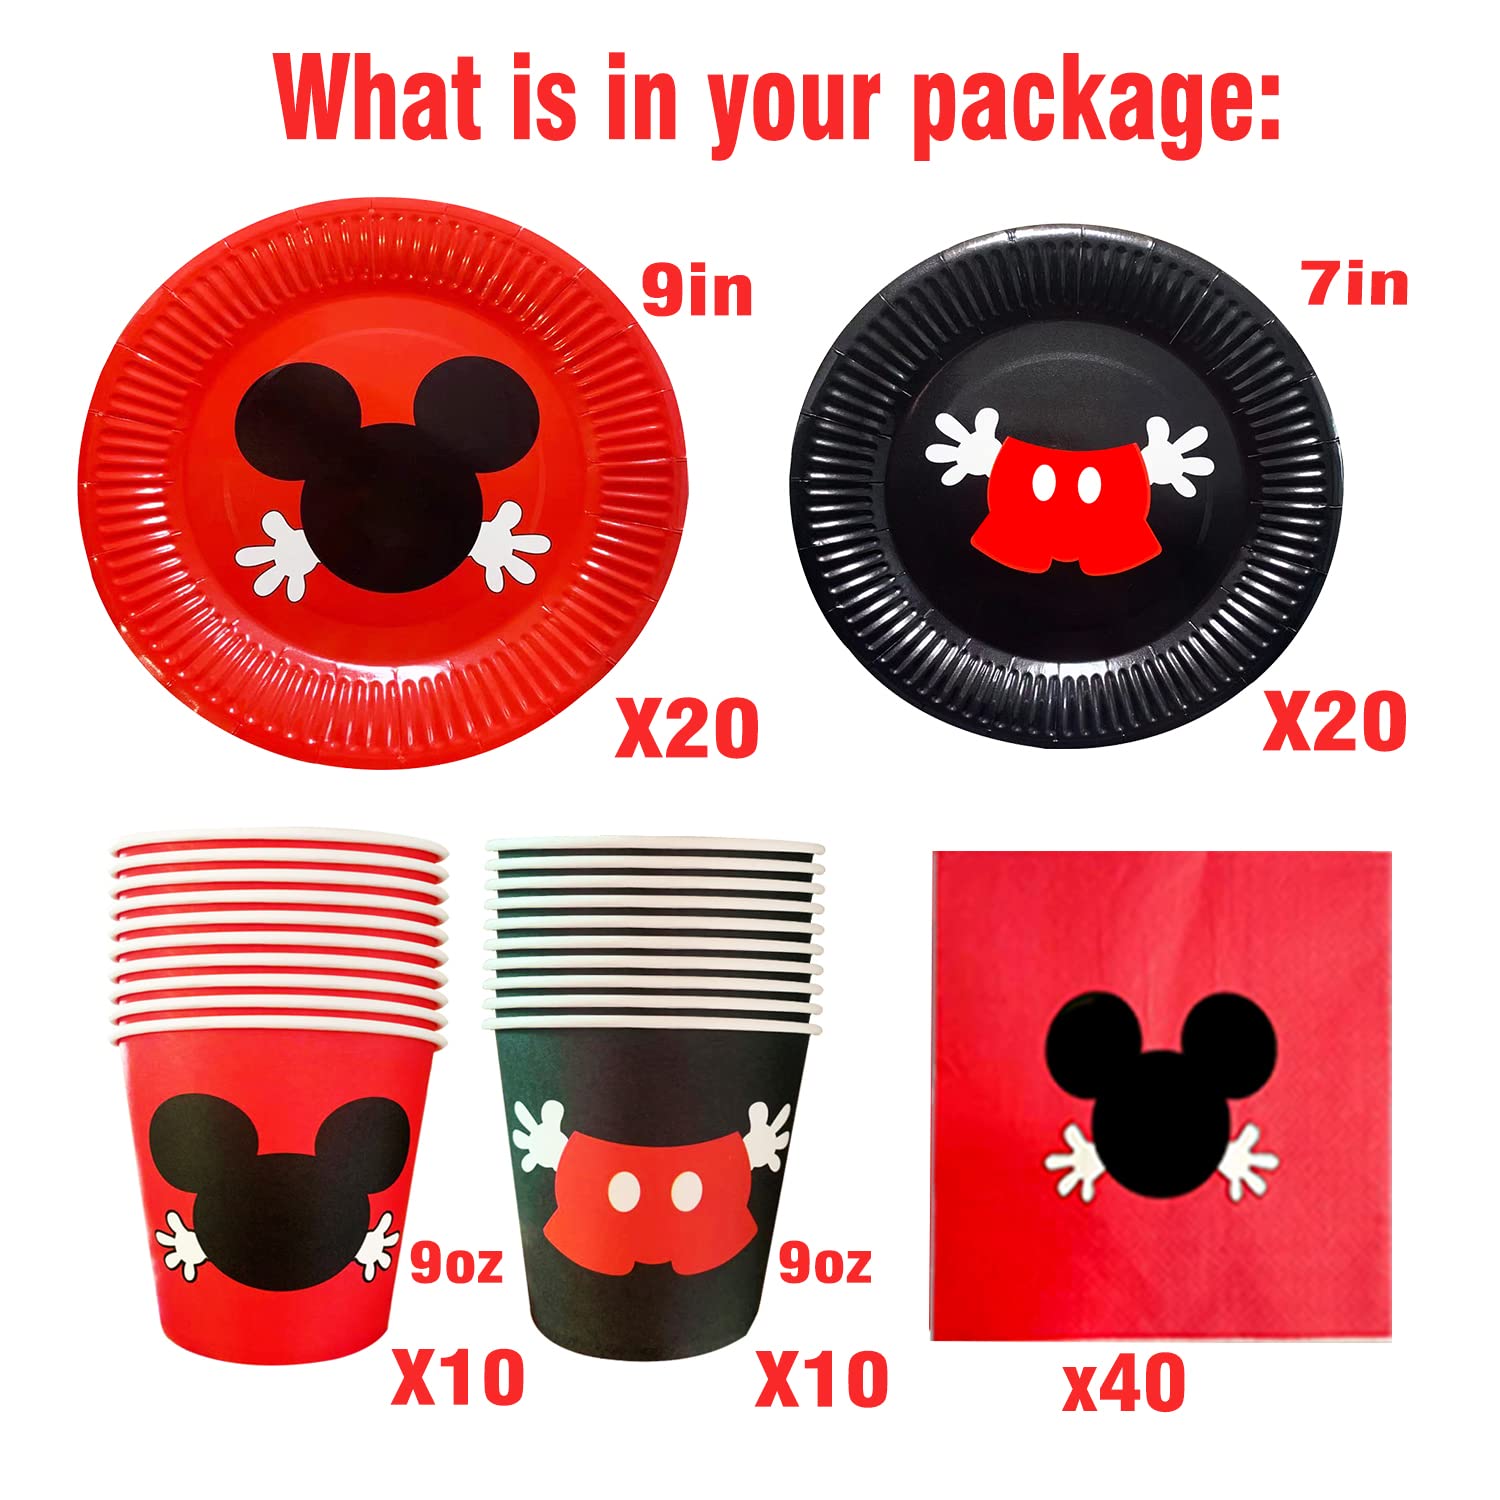 BEOXAGAR Mouse Birthday Party Supplies ,40pcs Mouse Paper Plates,20pcs Cups,40pcs Napkins ,Mouse Plates Napkins and Cups for Mouse Birthday Decorations Serve 20 Guests